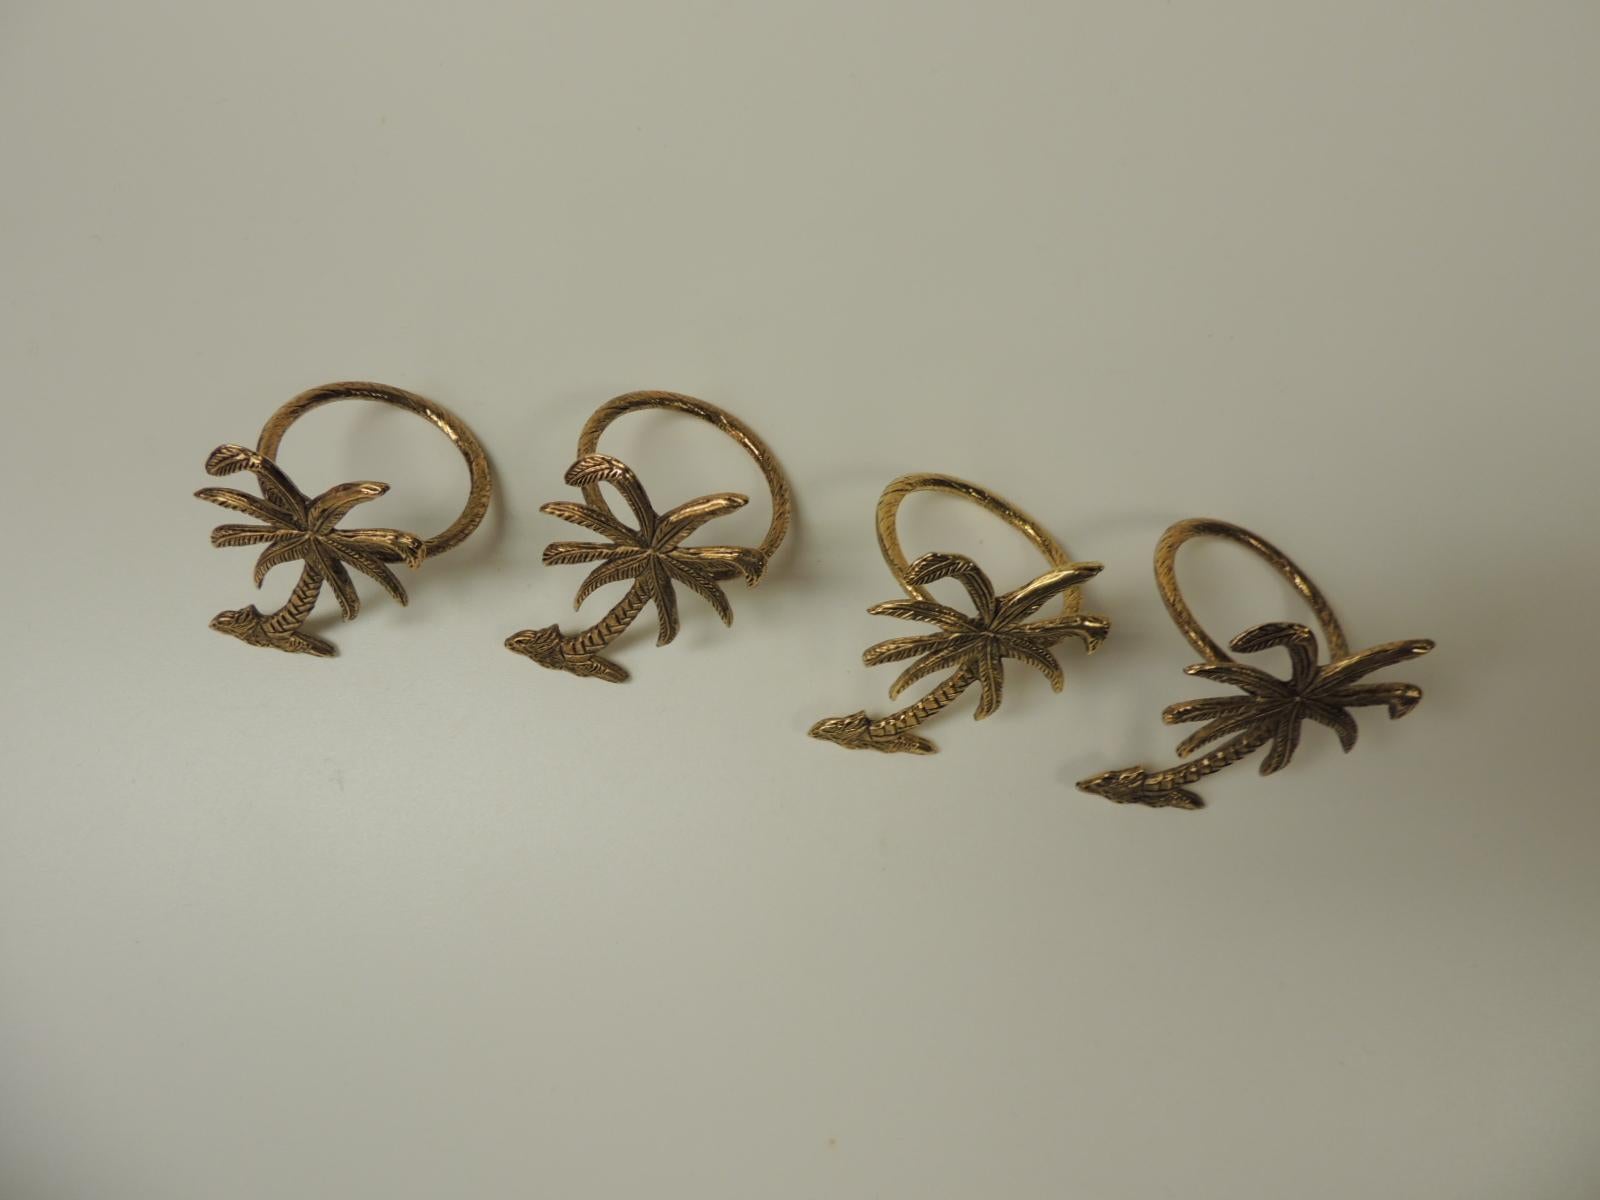 Set of four (4) decorative palm trees napkin holders
Gold tone round dinner napkin holders.
China
1990s
Size: 1 ¾ D x 2.5H.
 